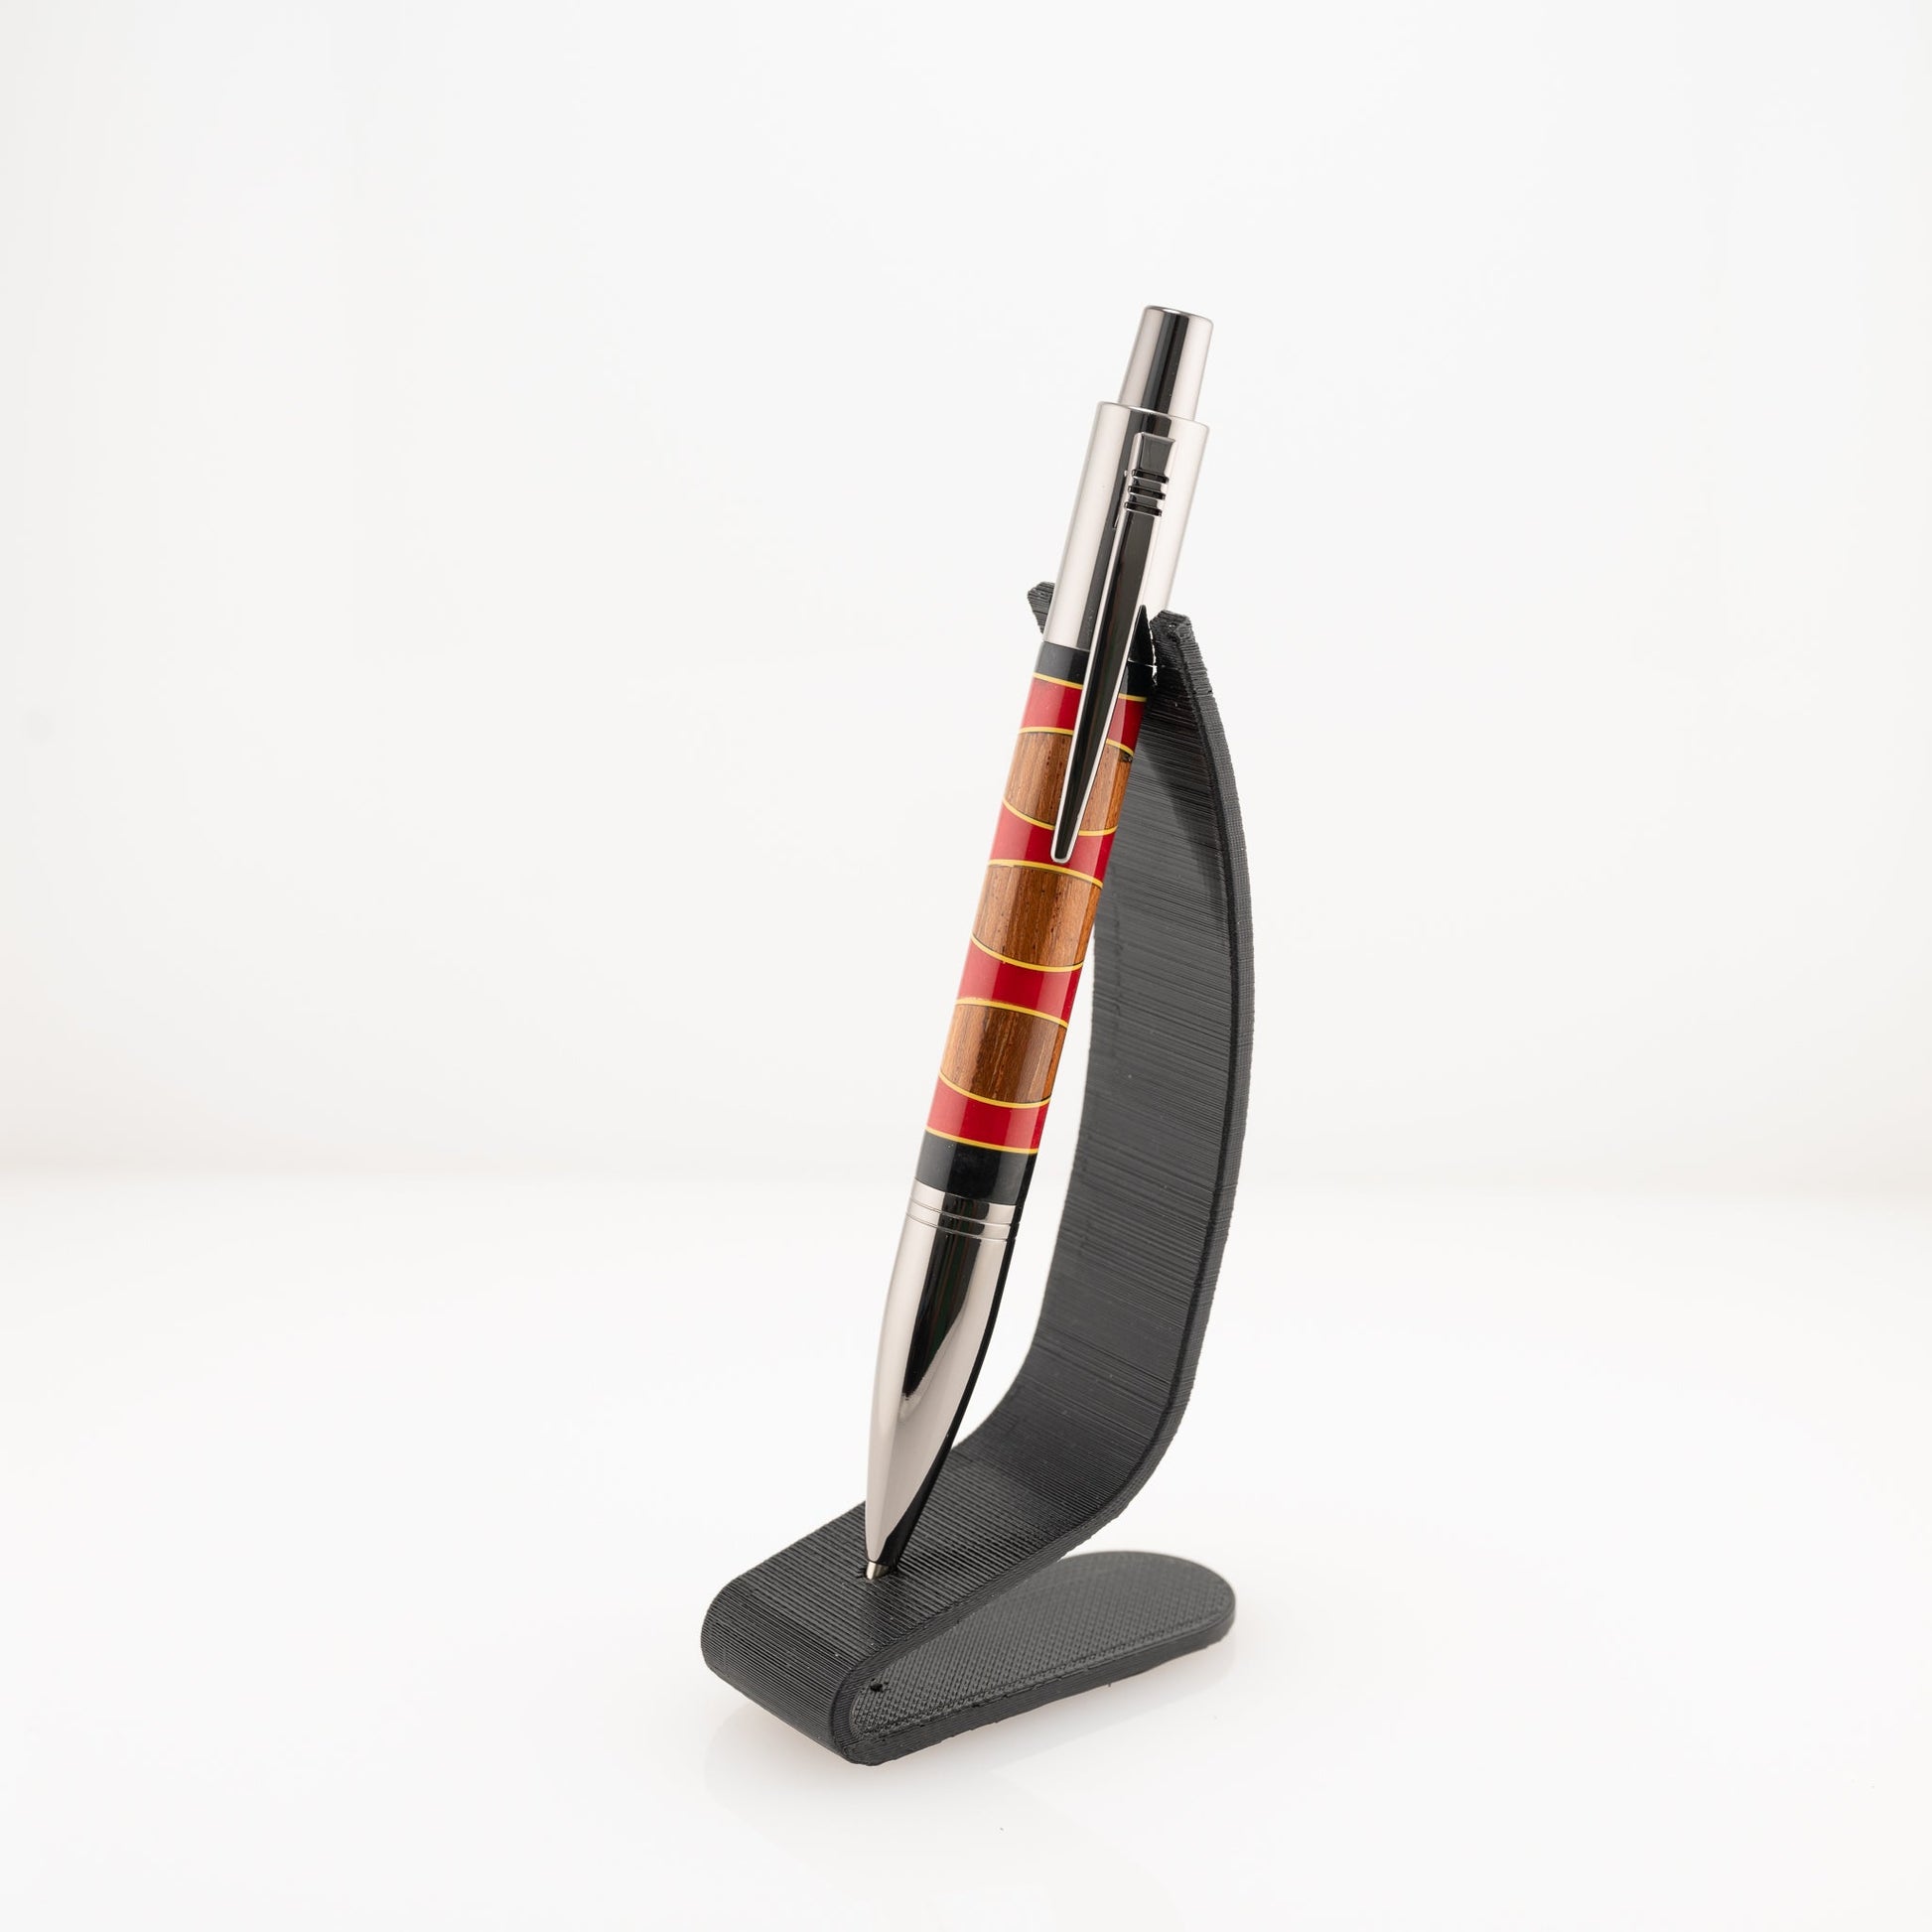 Handmade red and black resin and Canarywood segmented ballpoint click pen on a black stand.